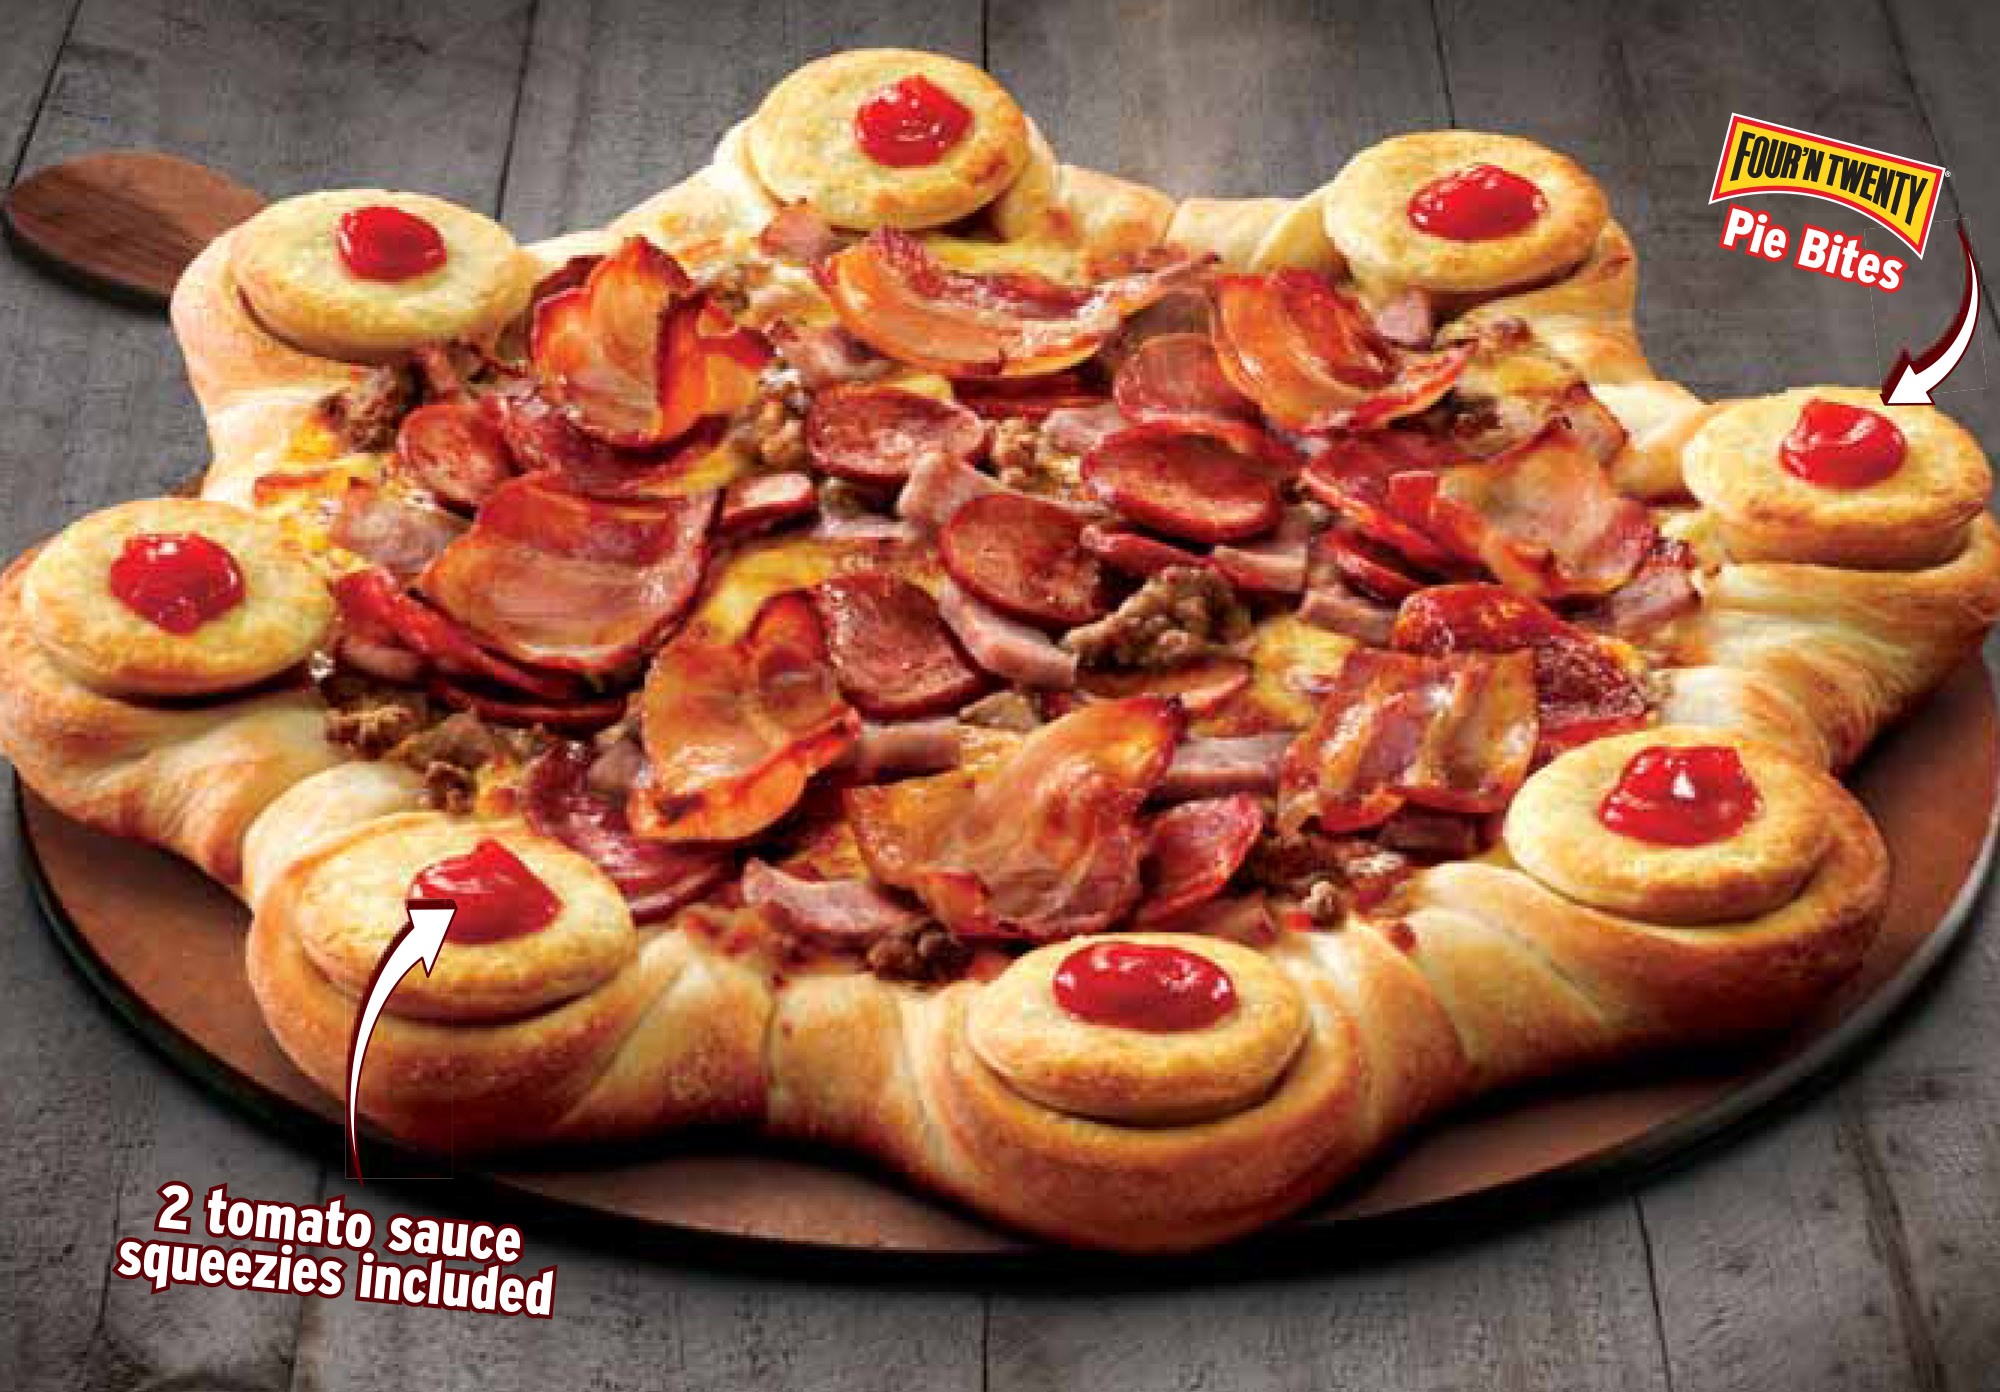 Pizza Hut And Four'N Twenty Give Birth To Love Child - B&T